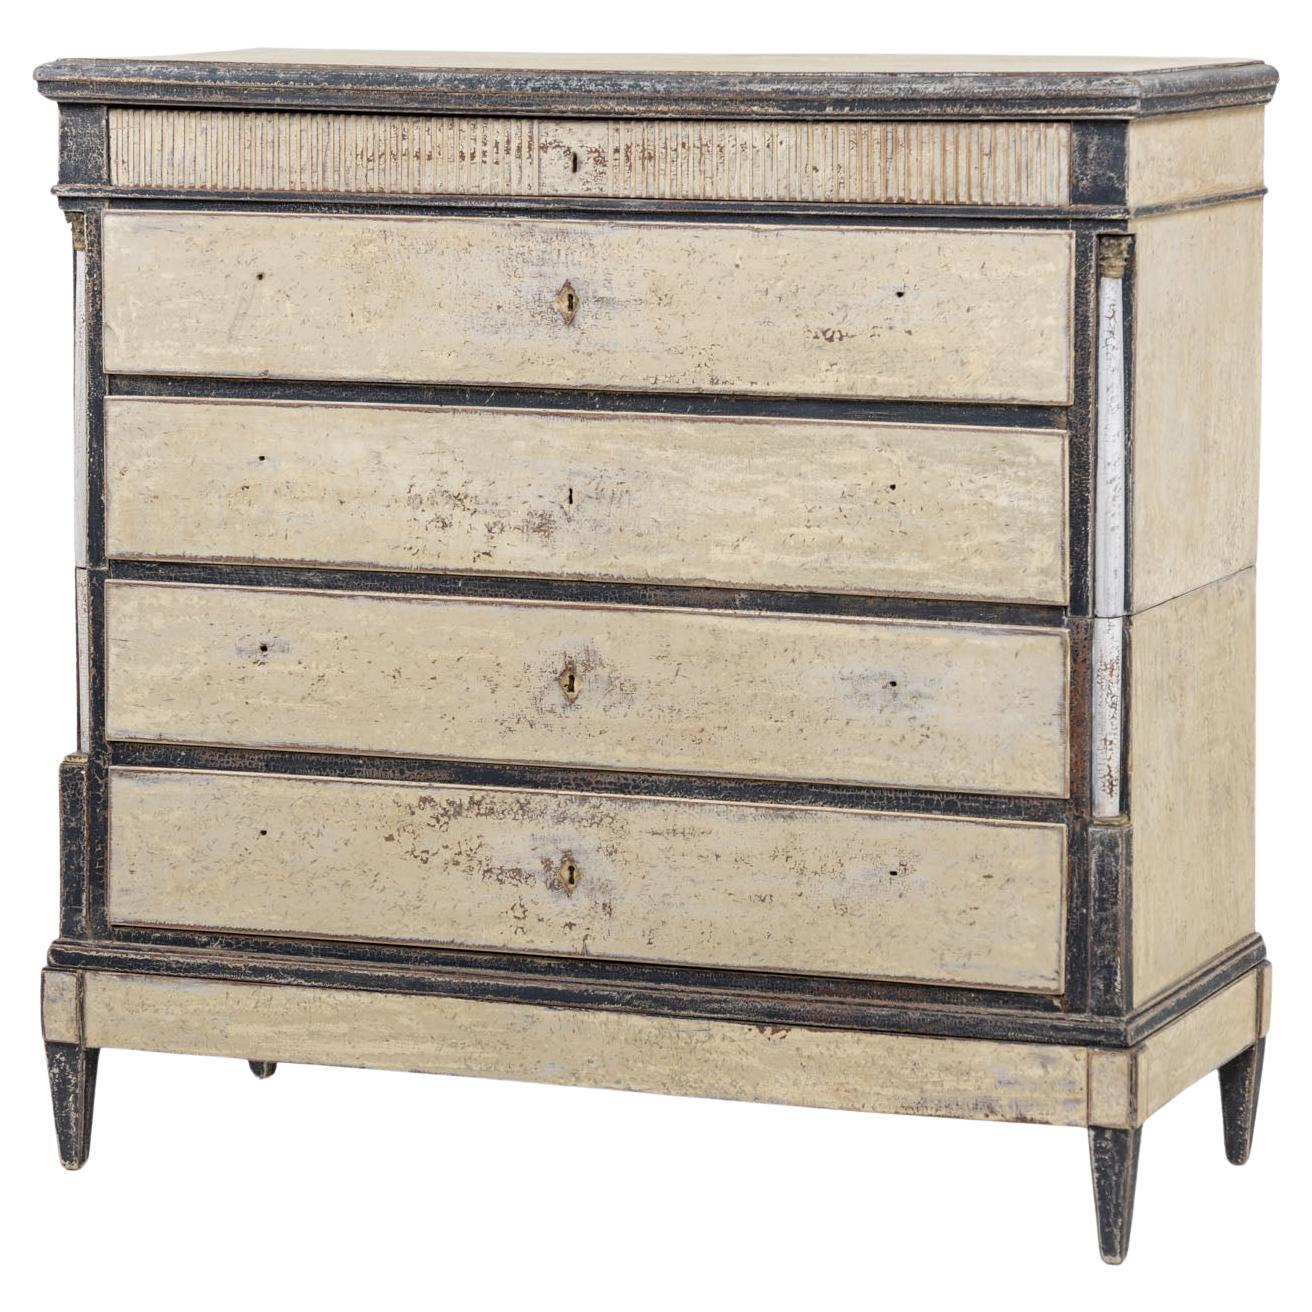 Hand-painted tall Chest of Drawers, Gustavian, Sweden, Early 19th Century